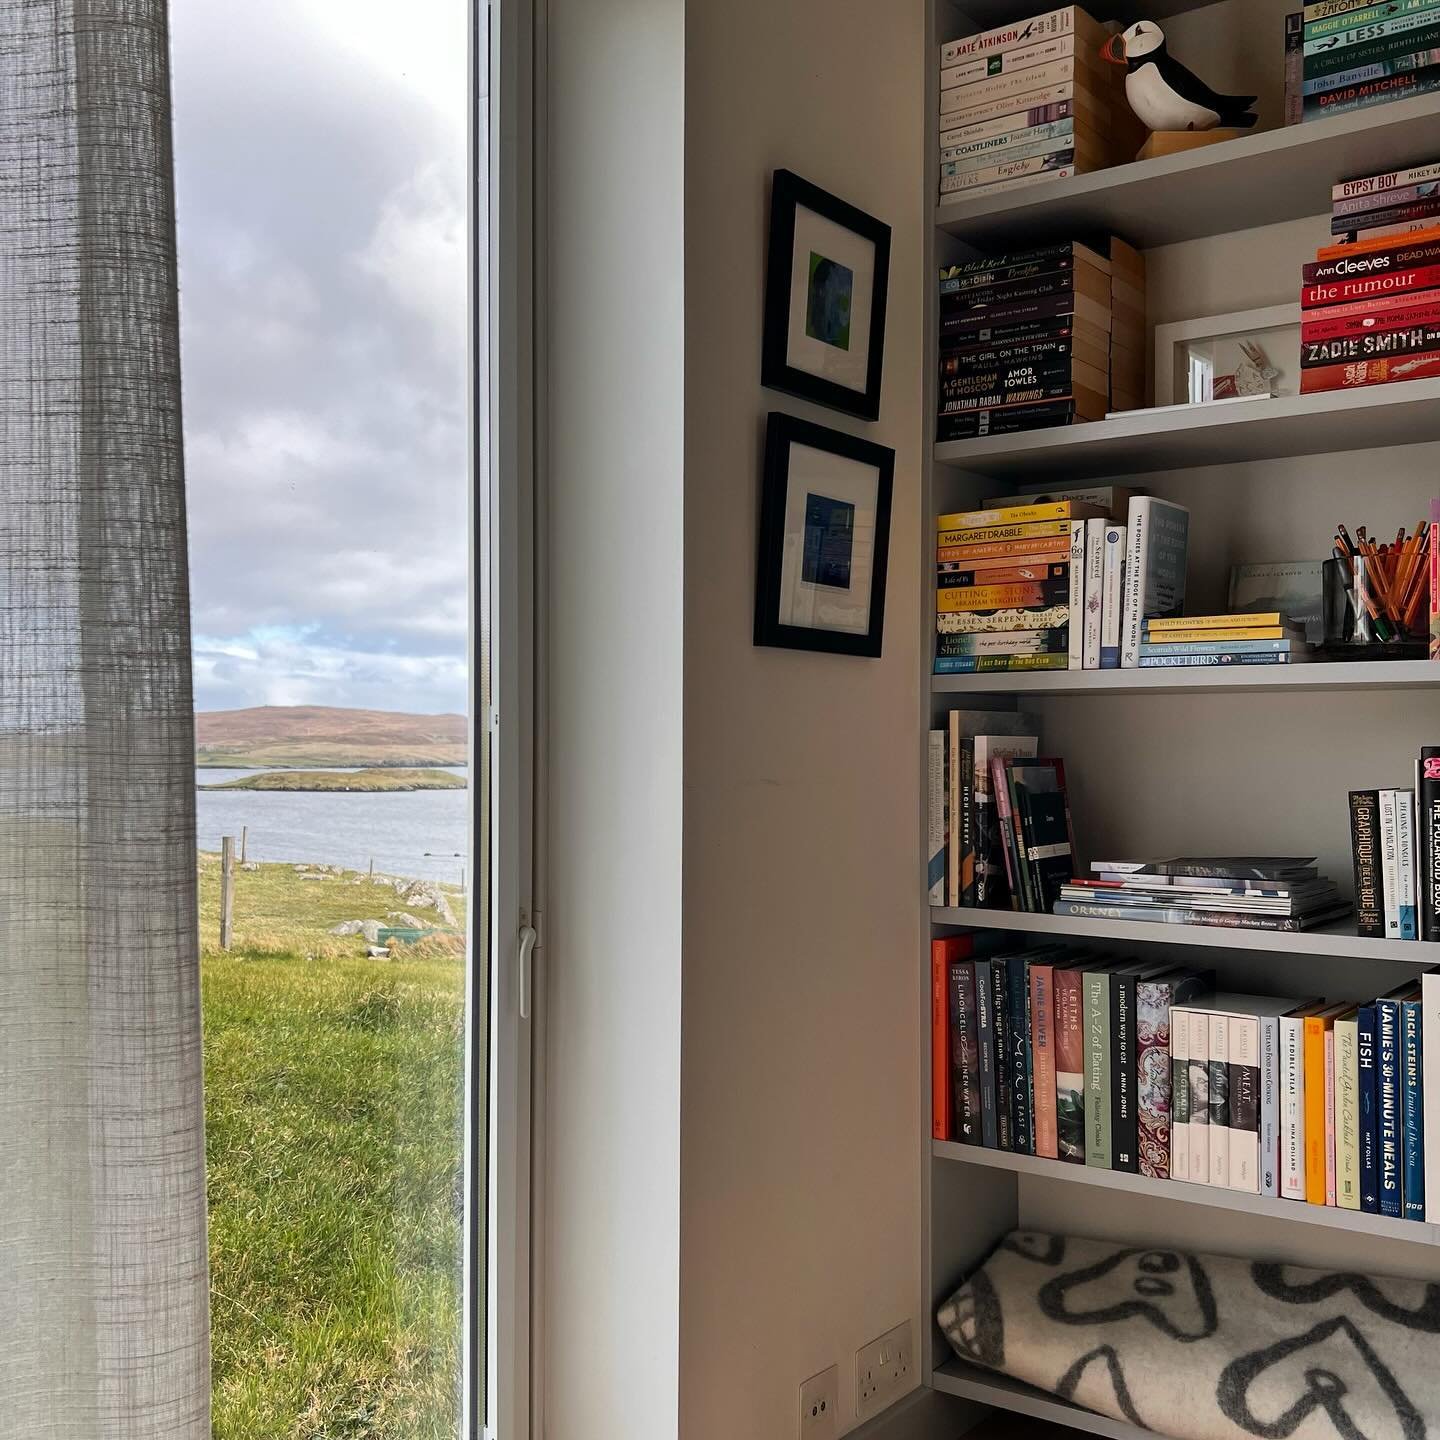 The view from the bed, if you tire from it we have lots of books to read.  Lots of novels and books of local interest #shetland #stayshetland